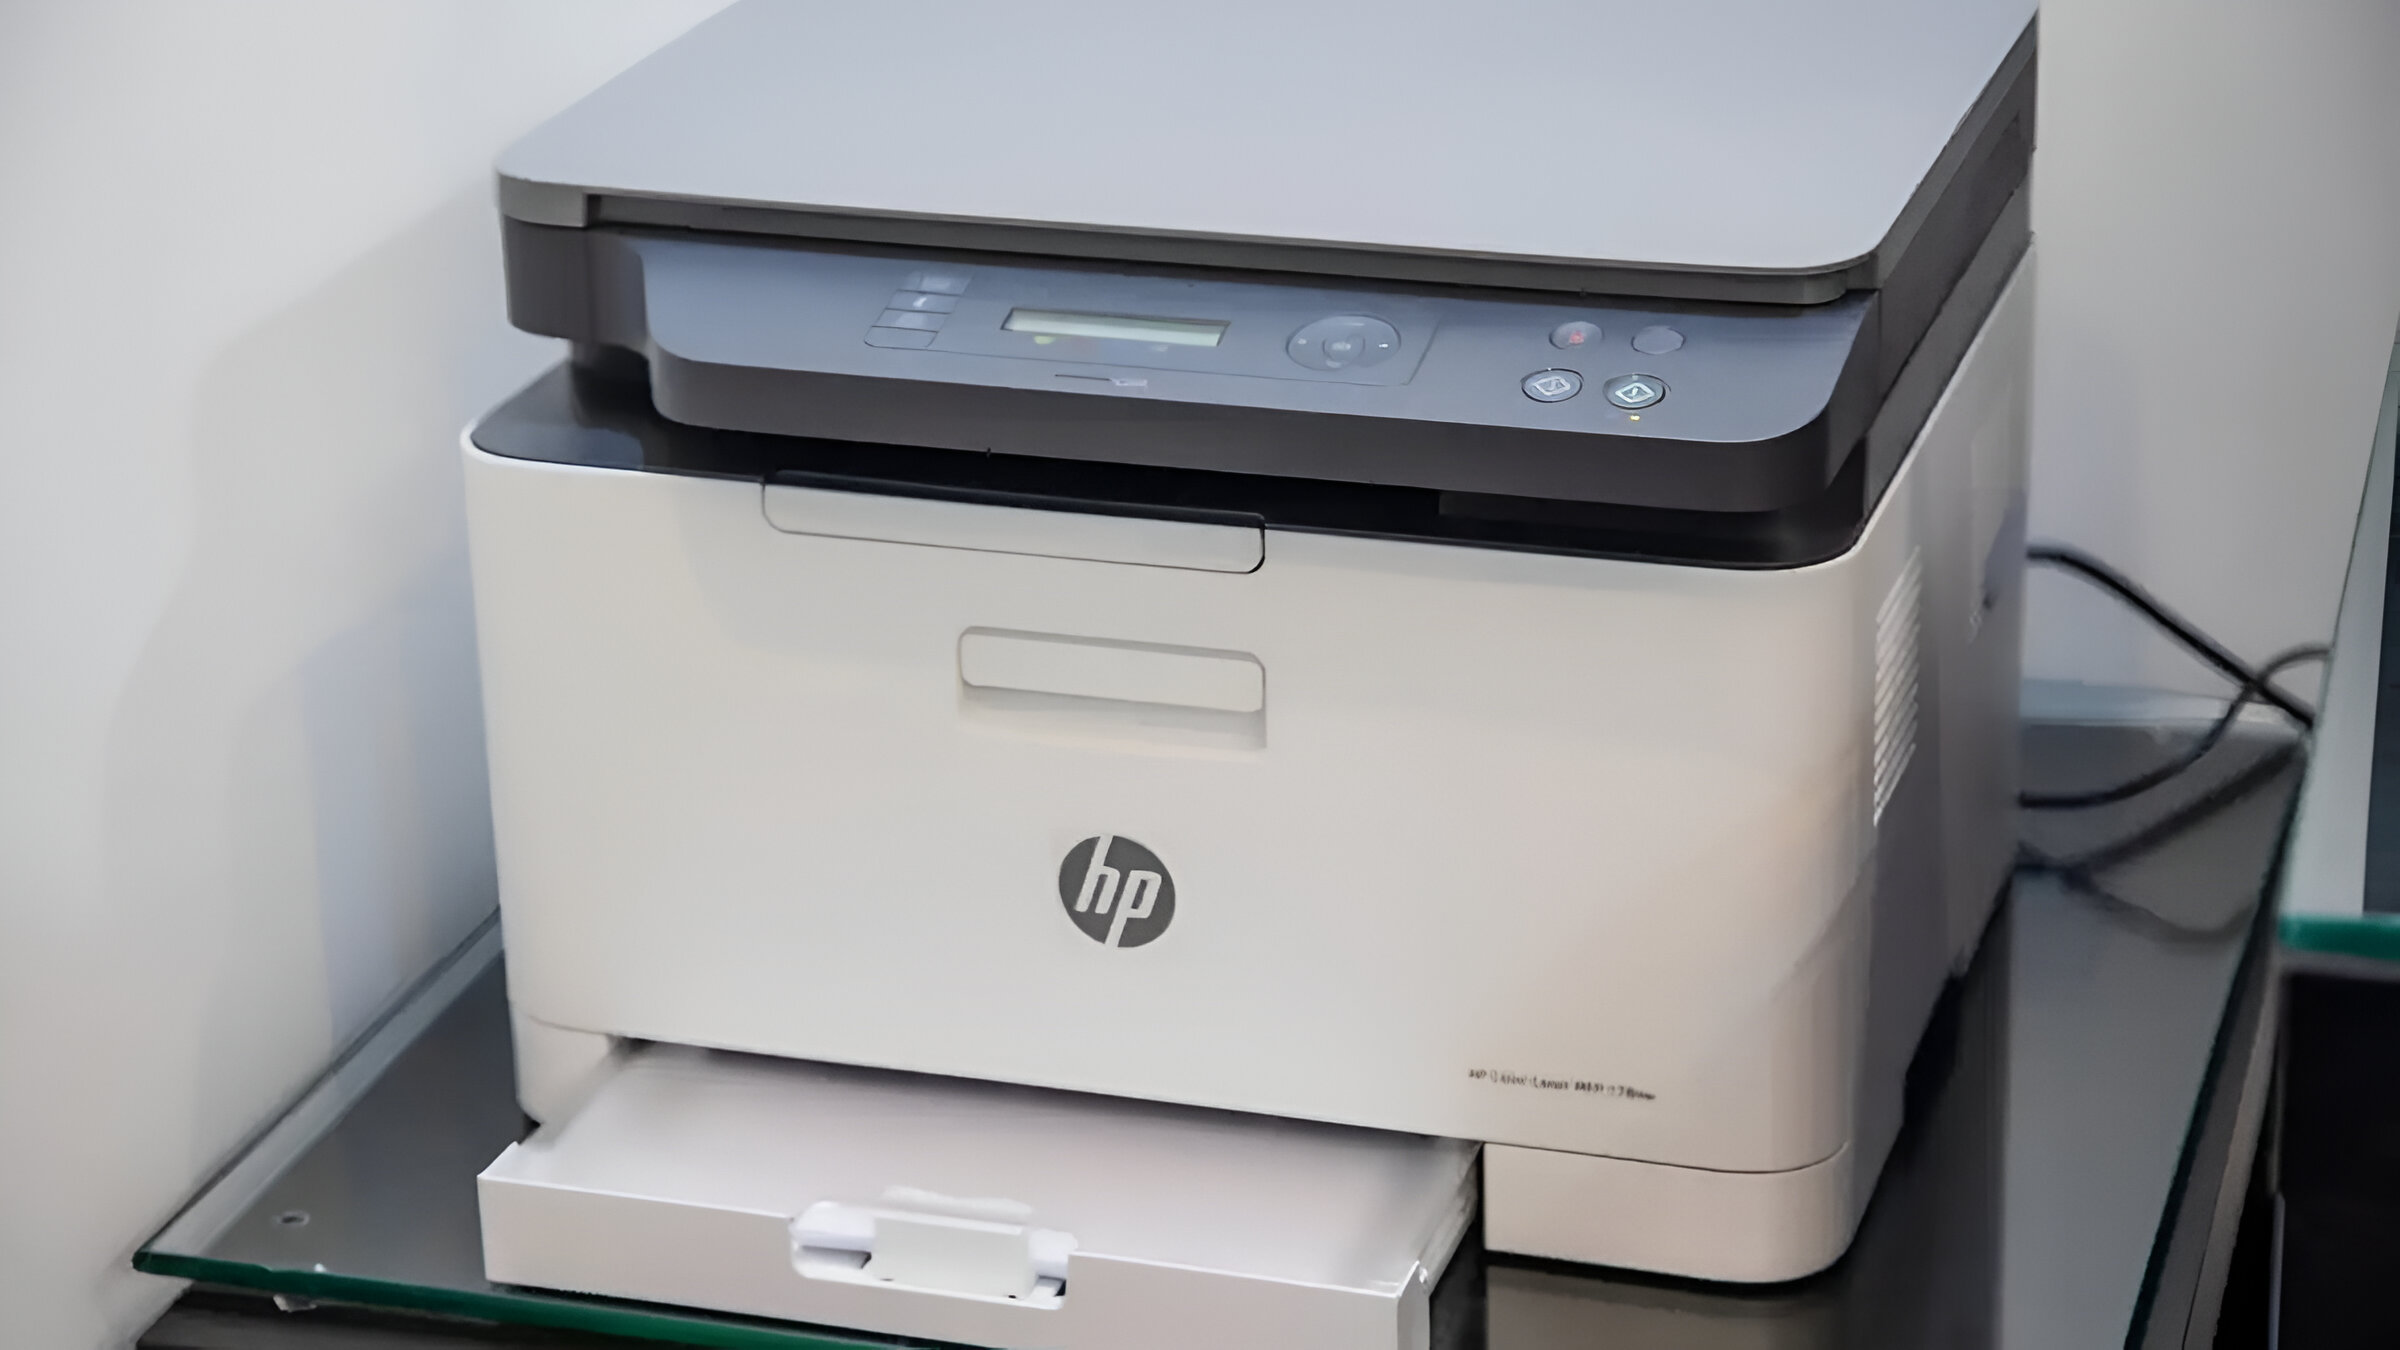 printer-troubleshooting-resolving-blinking-blue-light-issues-on-hp-printers